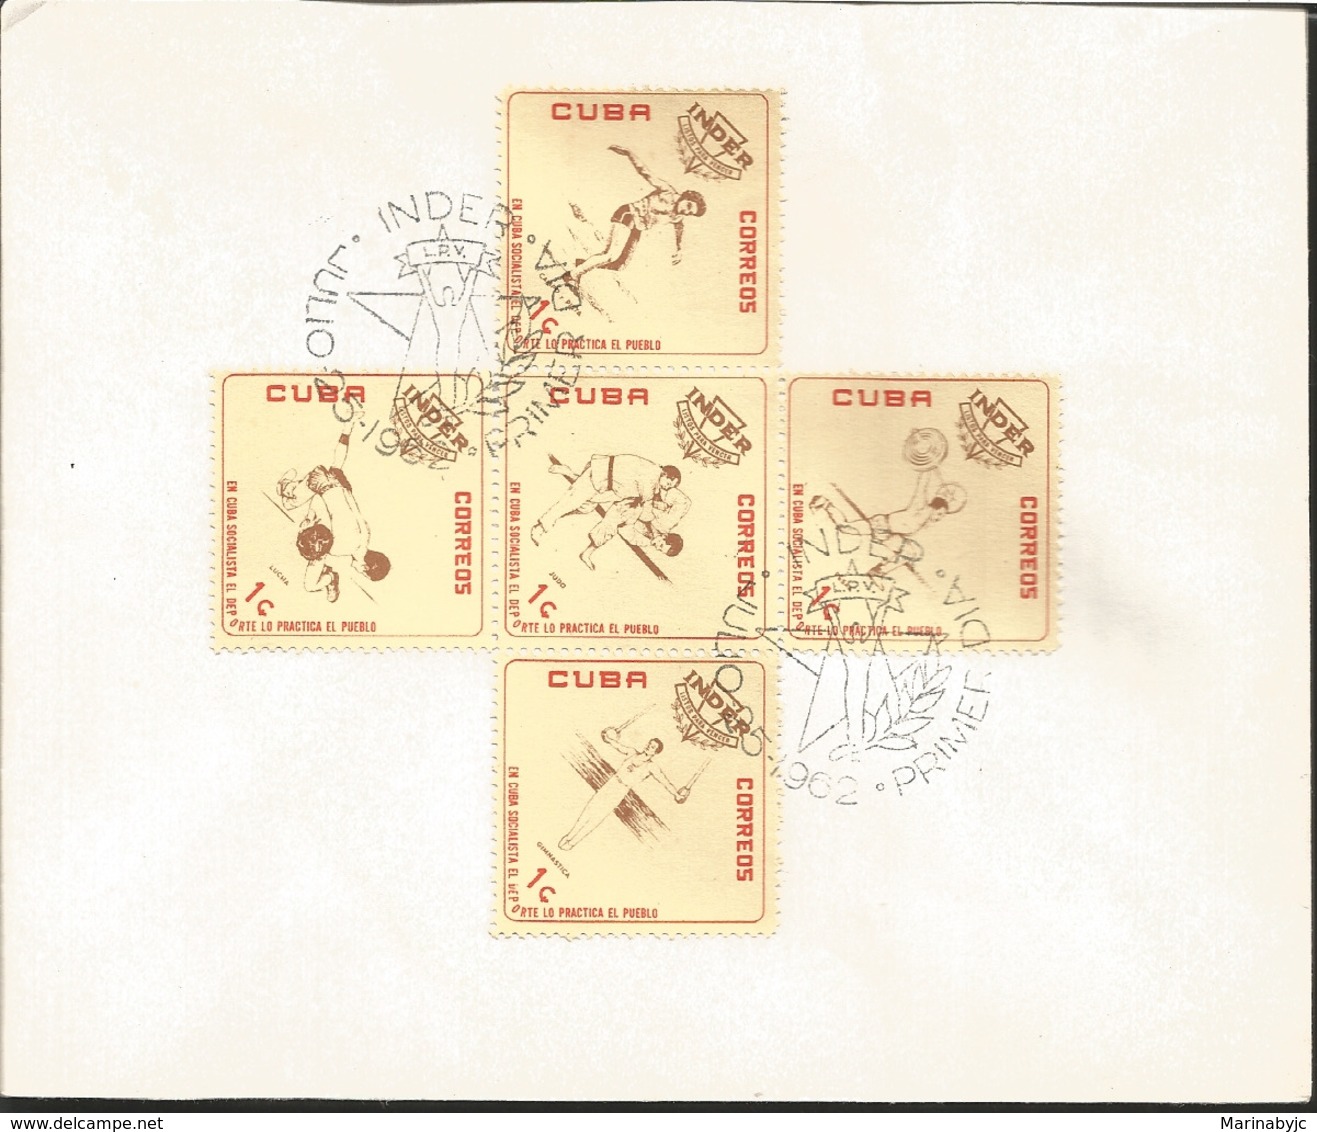 V) 1962 CARIBBEAN, SPORTS INSTITUTE, INDER, EMBLEM AND ATHLETES, BLACK CANCELLATION, WITH SLOGAN CANCELLATION, FDC - Storia Postale